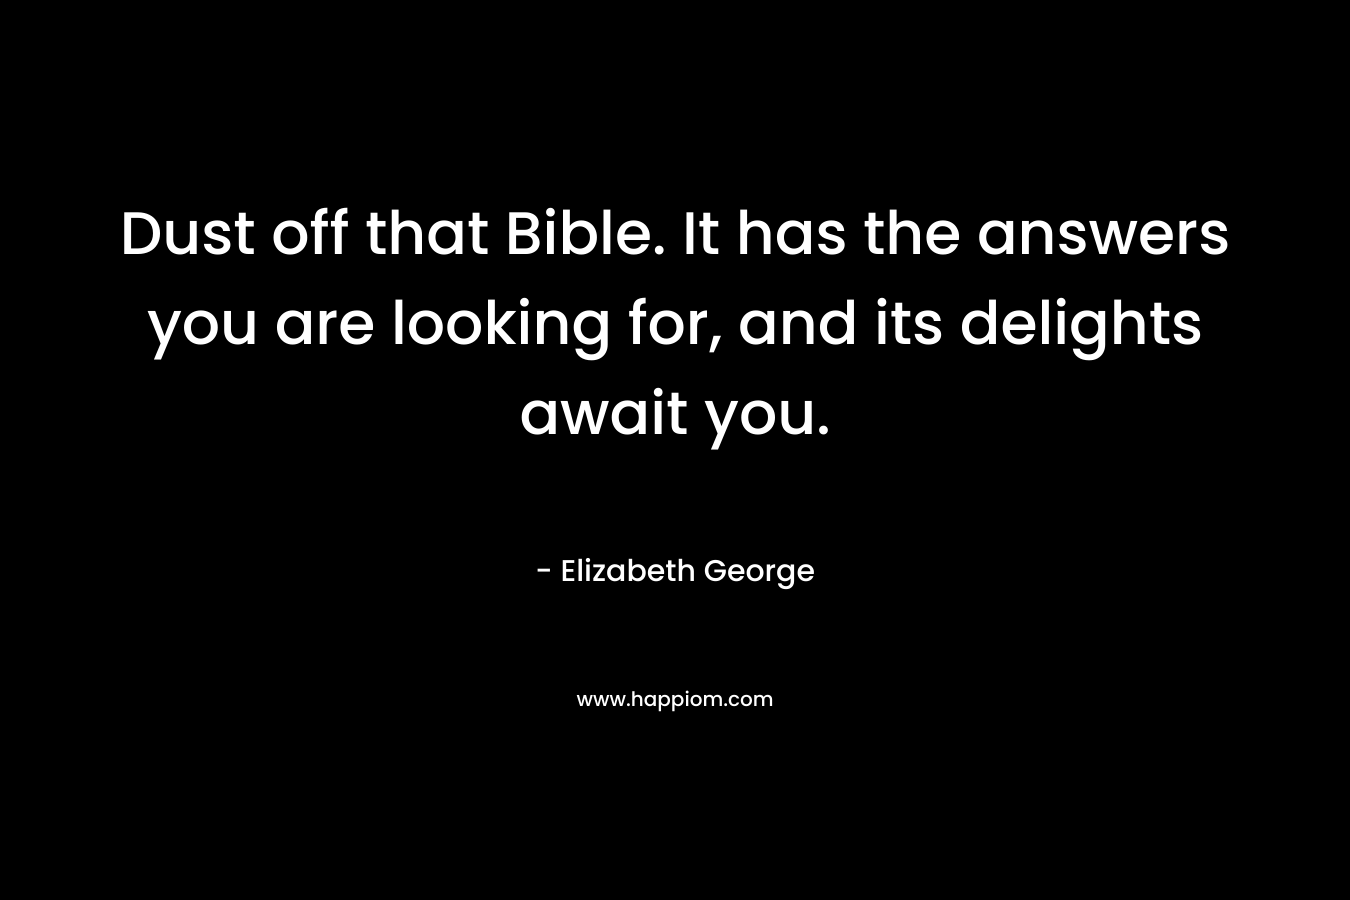 Dust off that Bible. It has the answers you are looking for, and its delights await you. – Elizabeth George